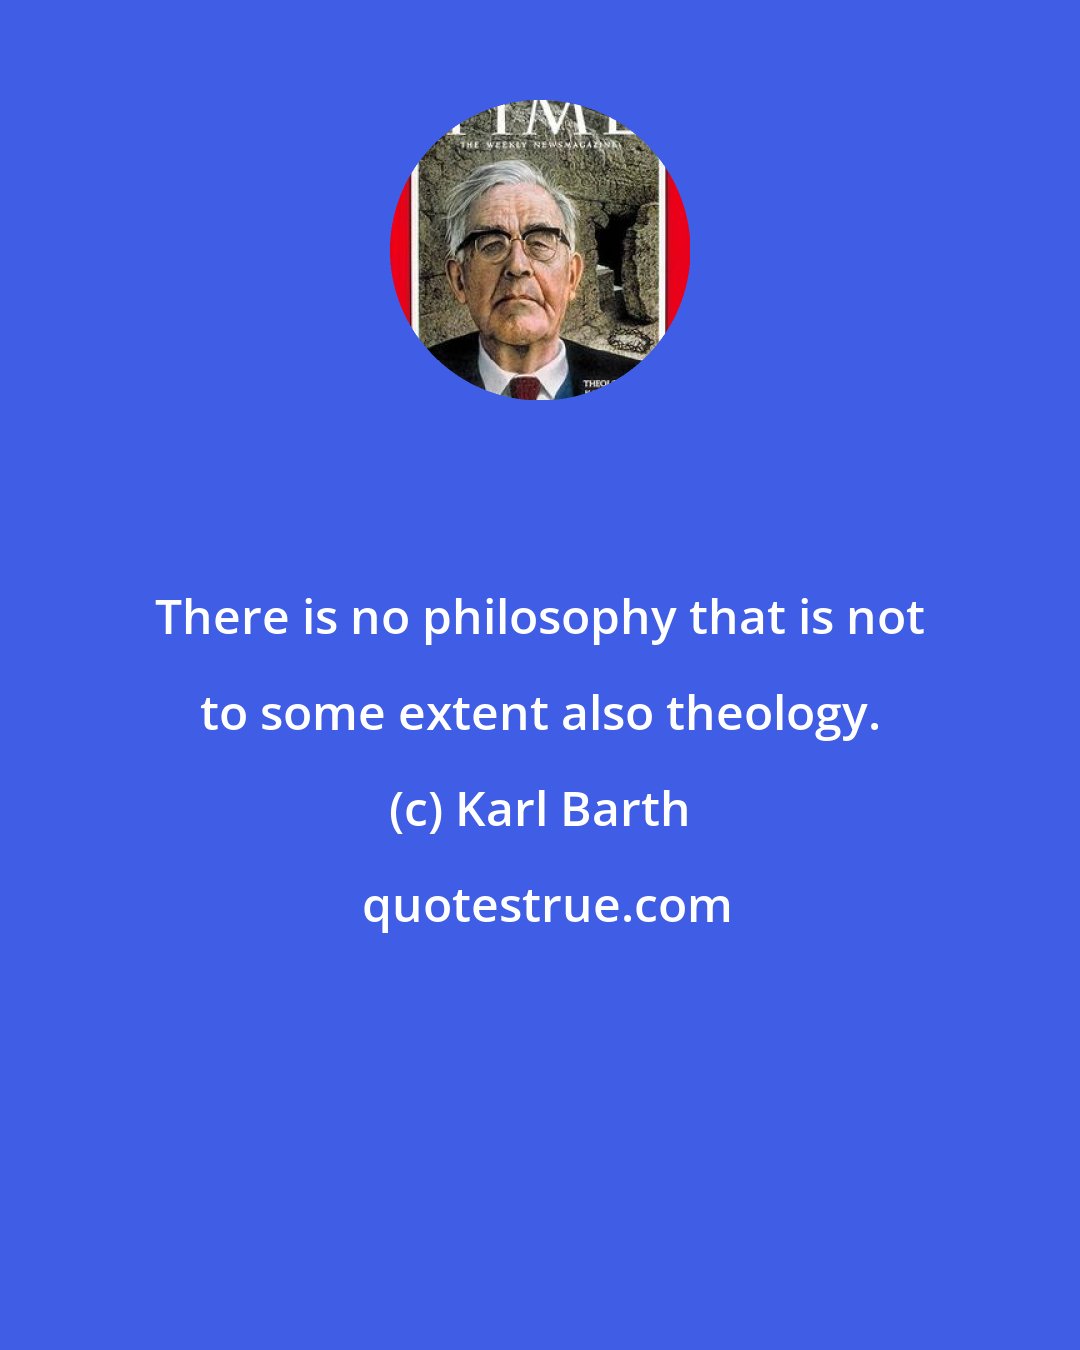 Karl Barth: There is no philosophy that is not to some extent also theology.